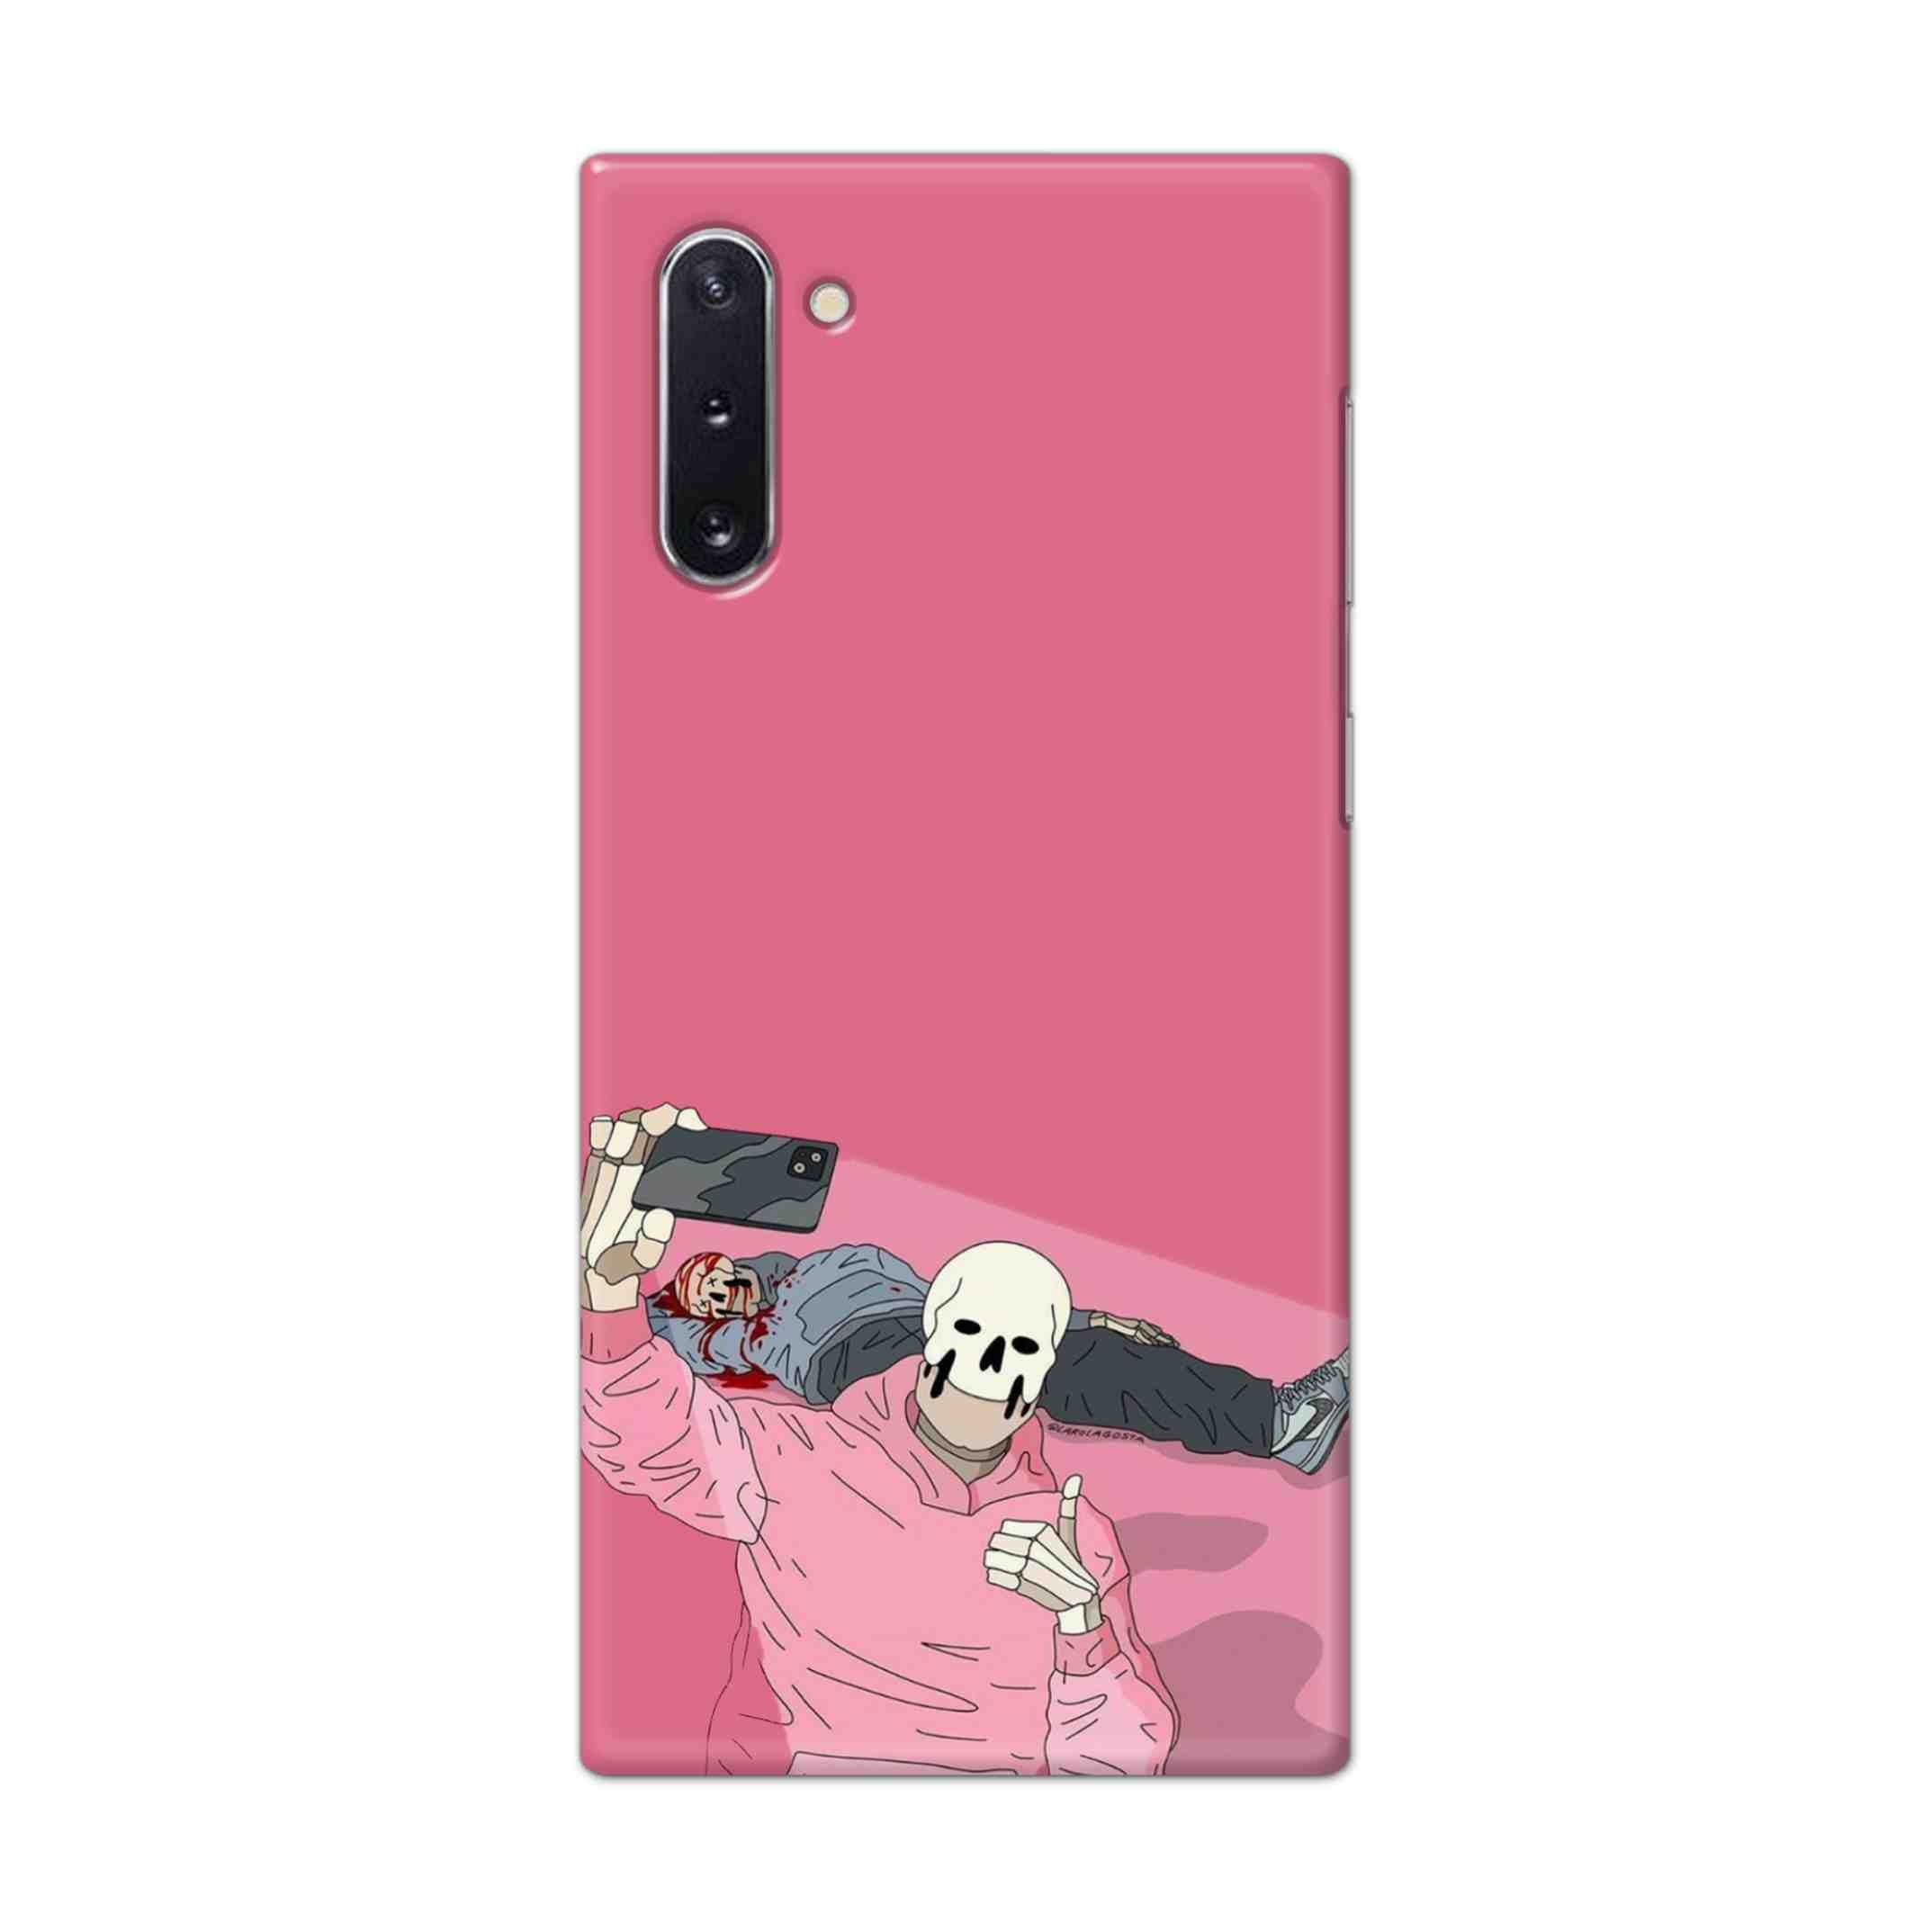 Buy Selfie Hard Back Mobile Phone Case Cover For Samsung Galaxy Note 10 Online